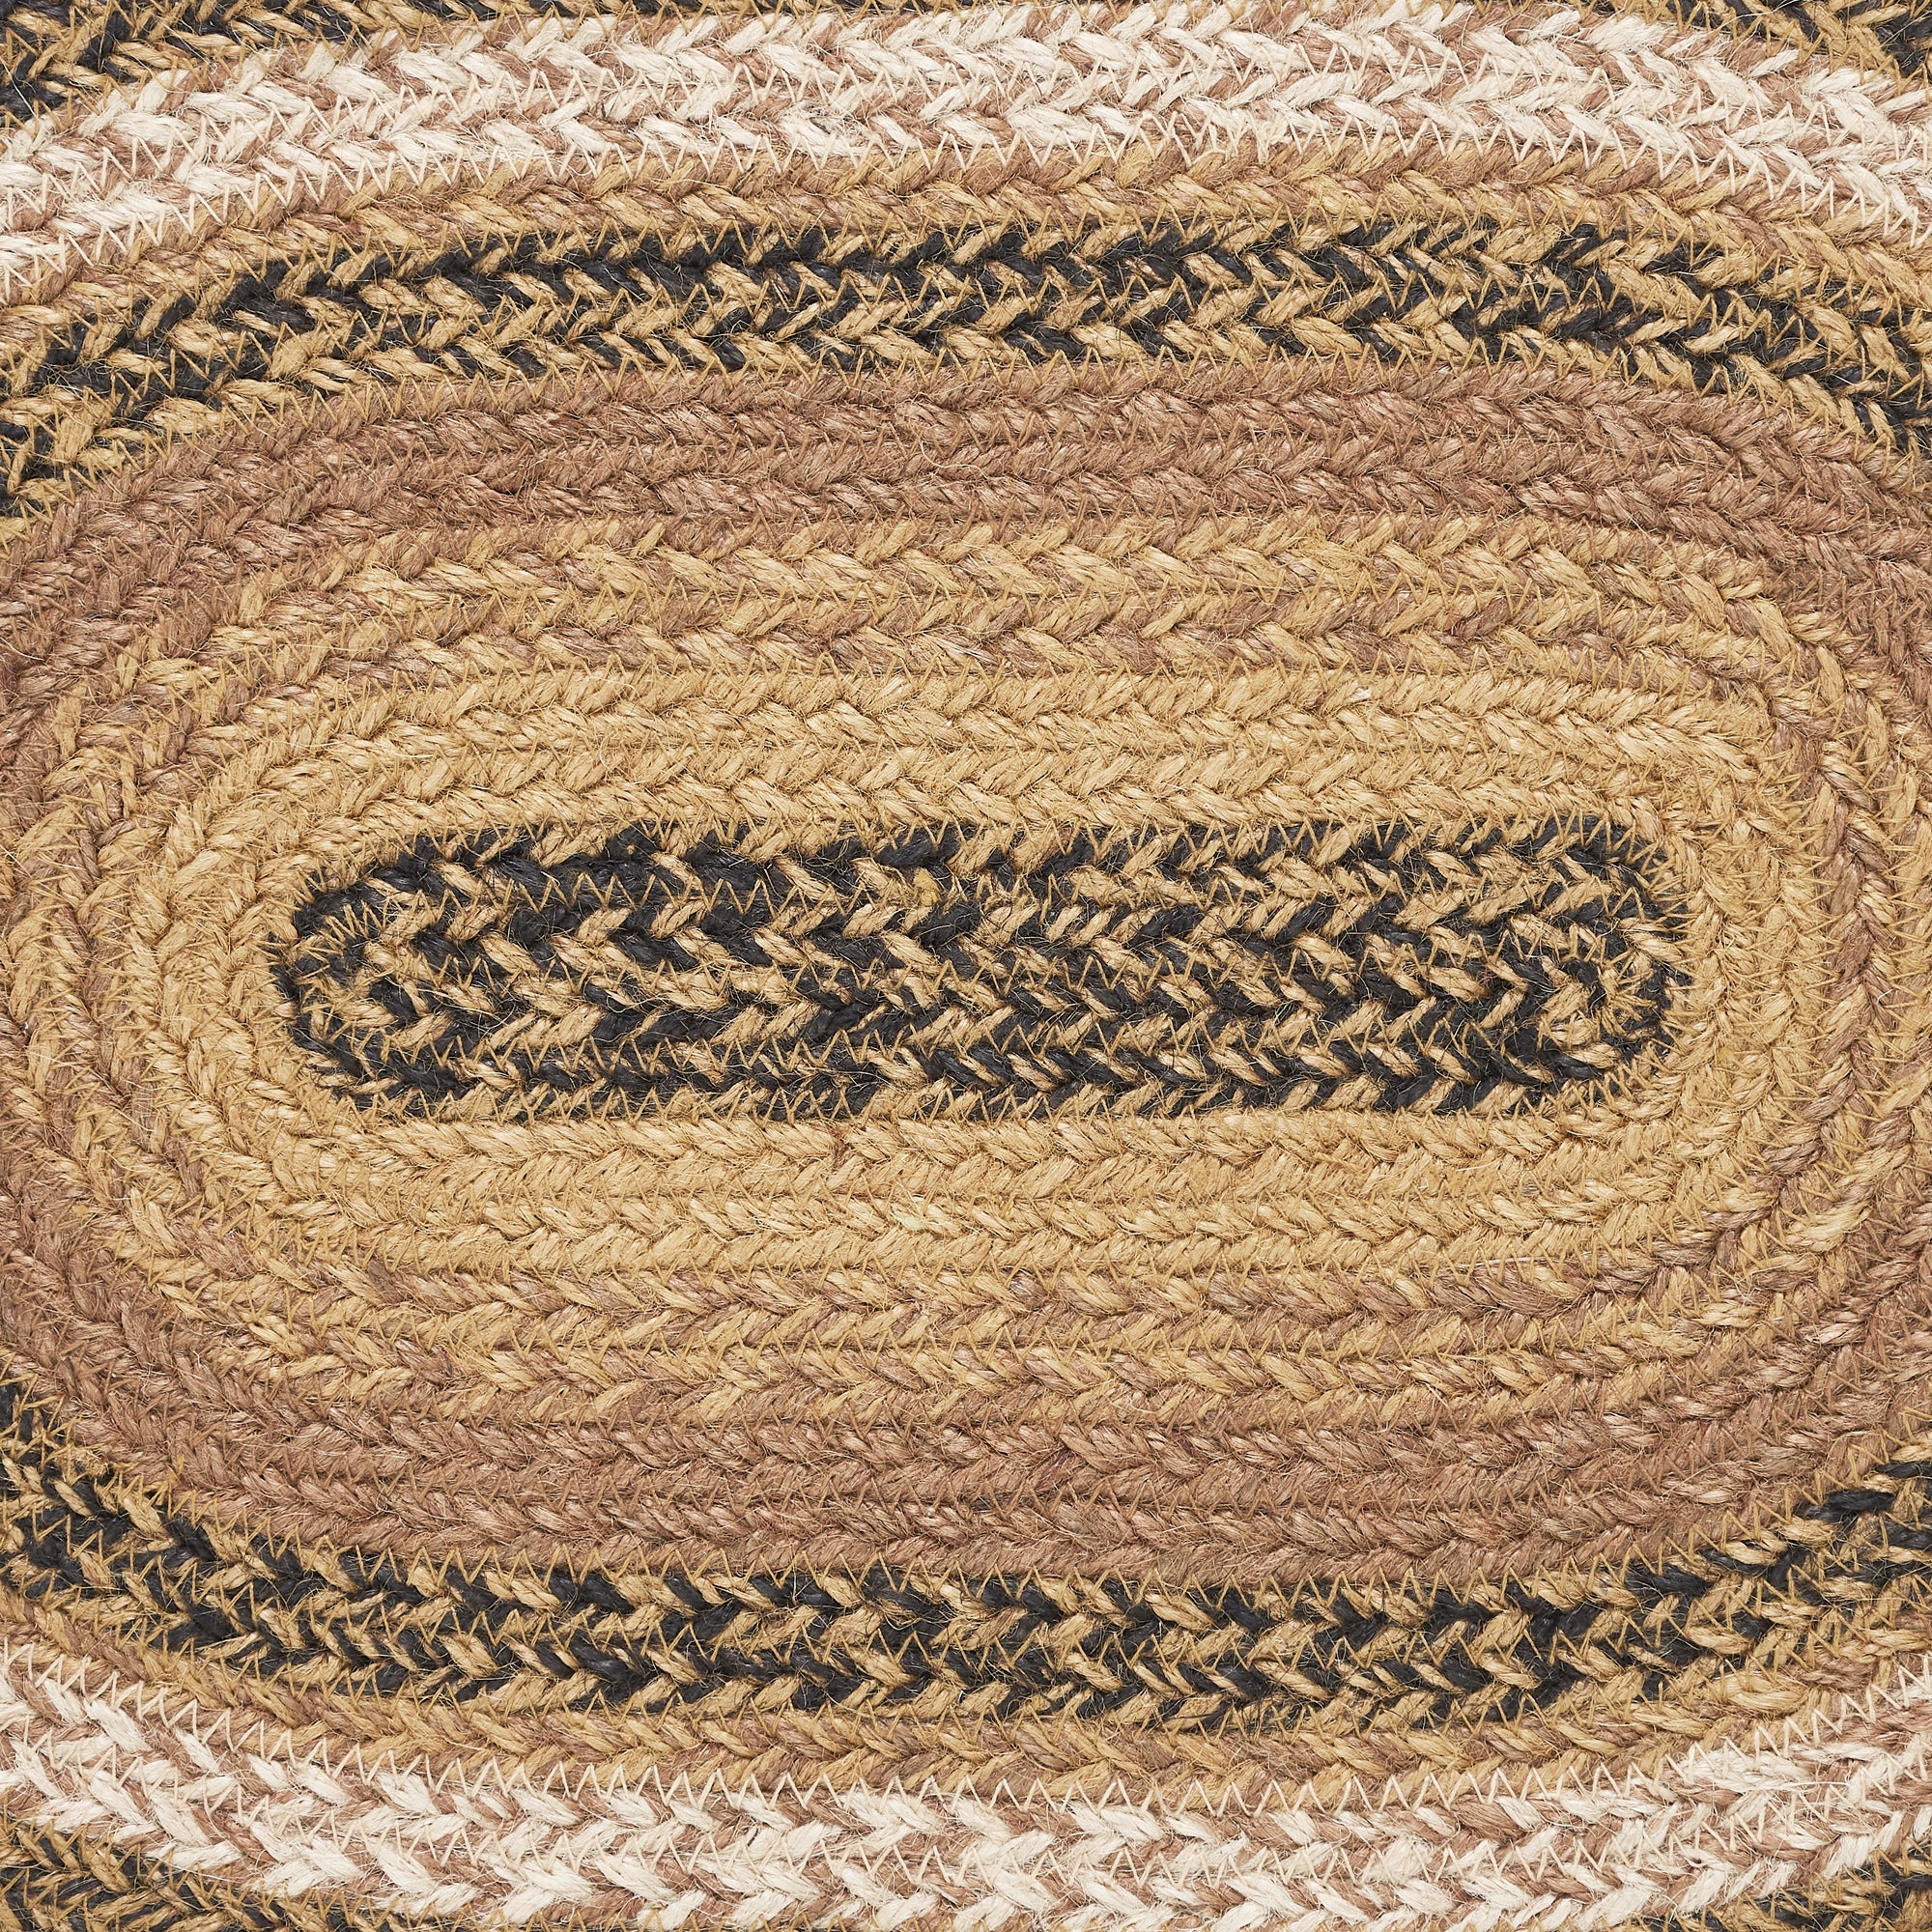 Kettle Grove Jute Braided Oval Placemat 10"x15" VHC Brands